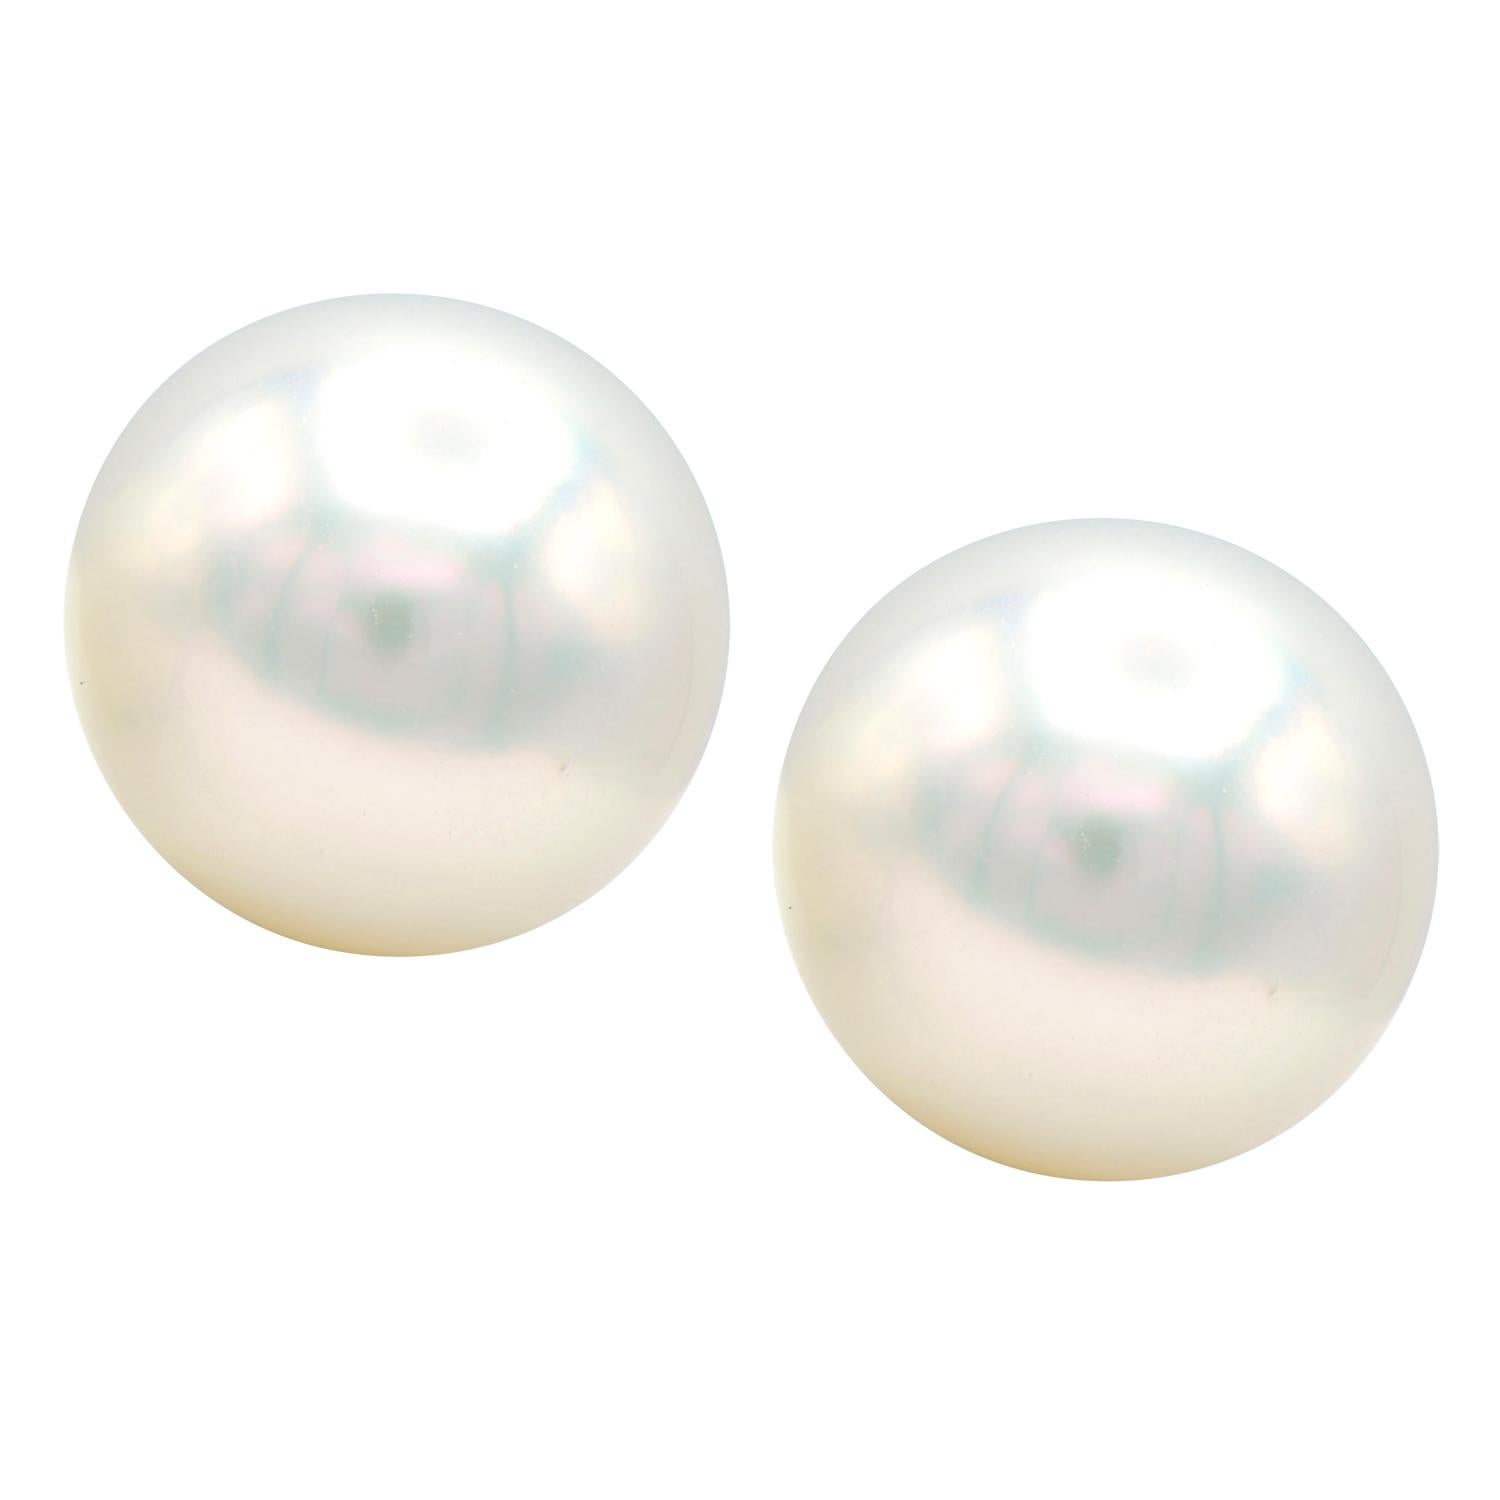 Round Cut South Sea Pearl Stud Earrings with 14 Karat White Gold Posts and Backs